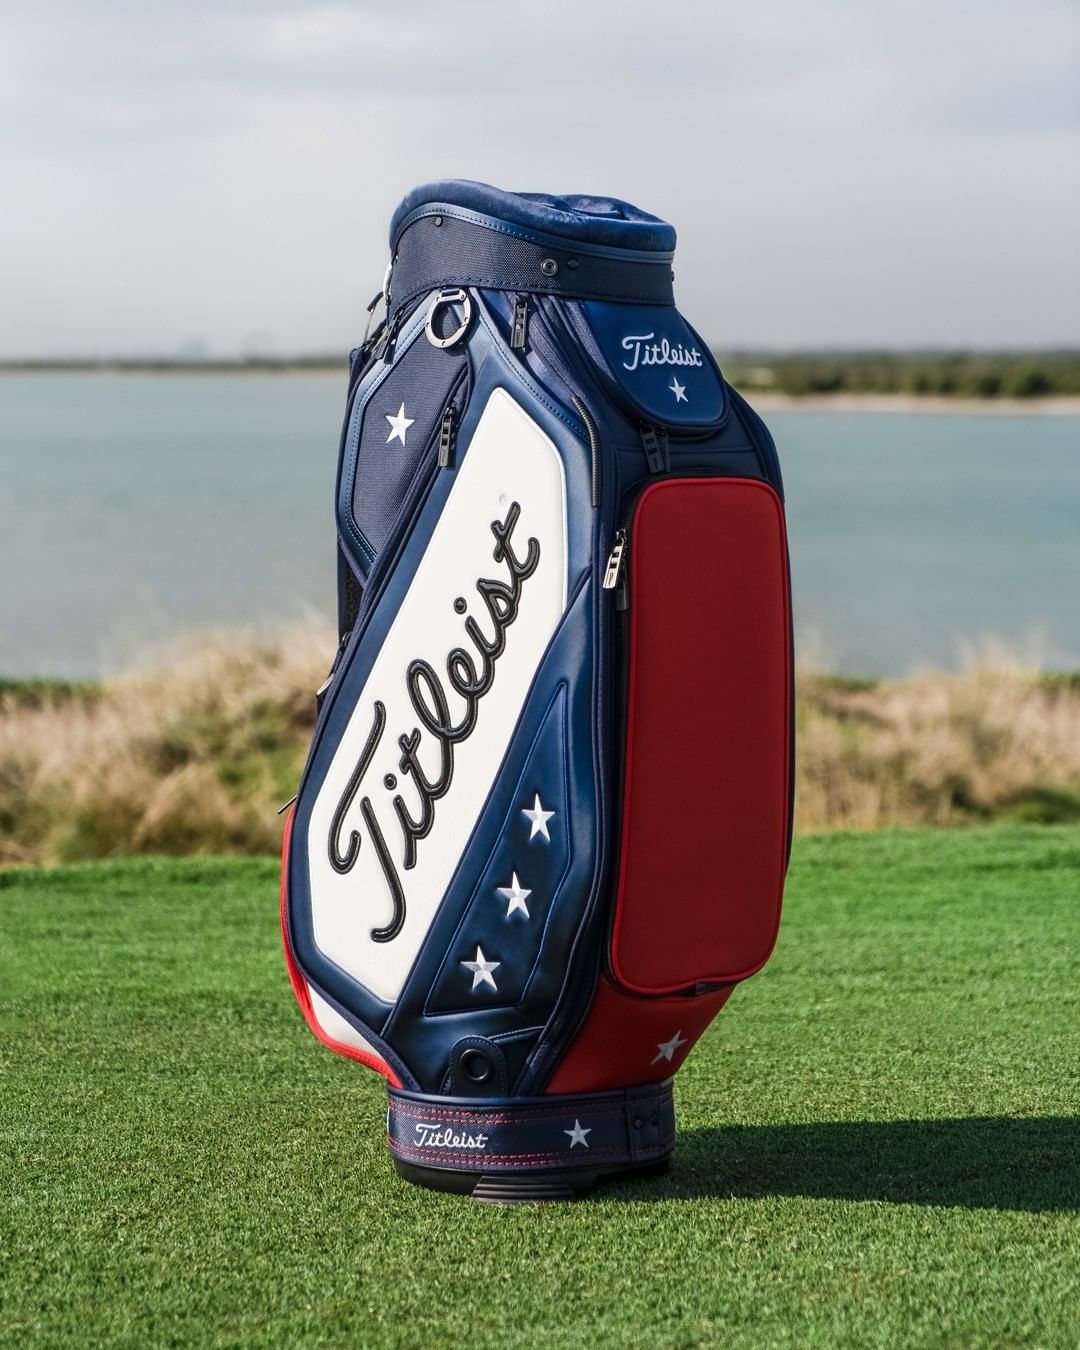 WIN A LIMITED EDITION TITLEIST TOUR BAG